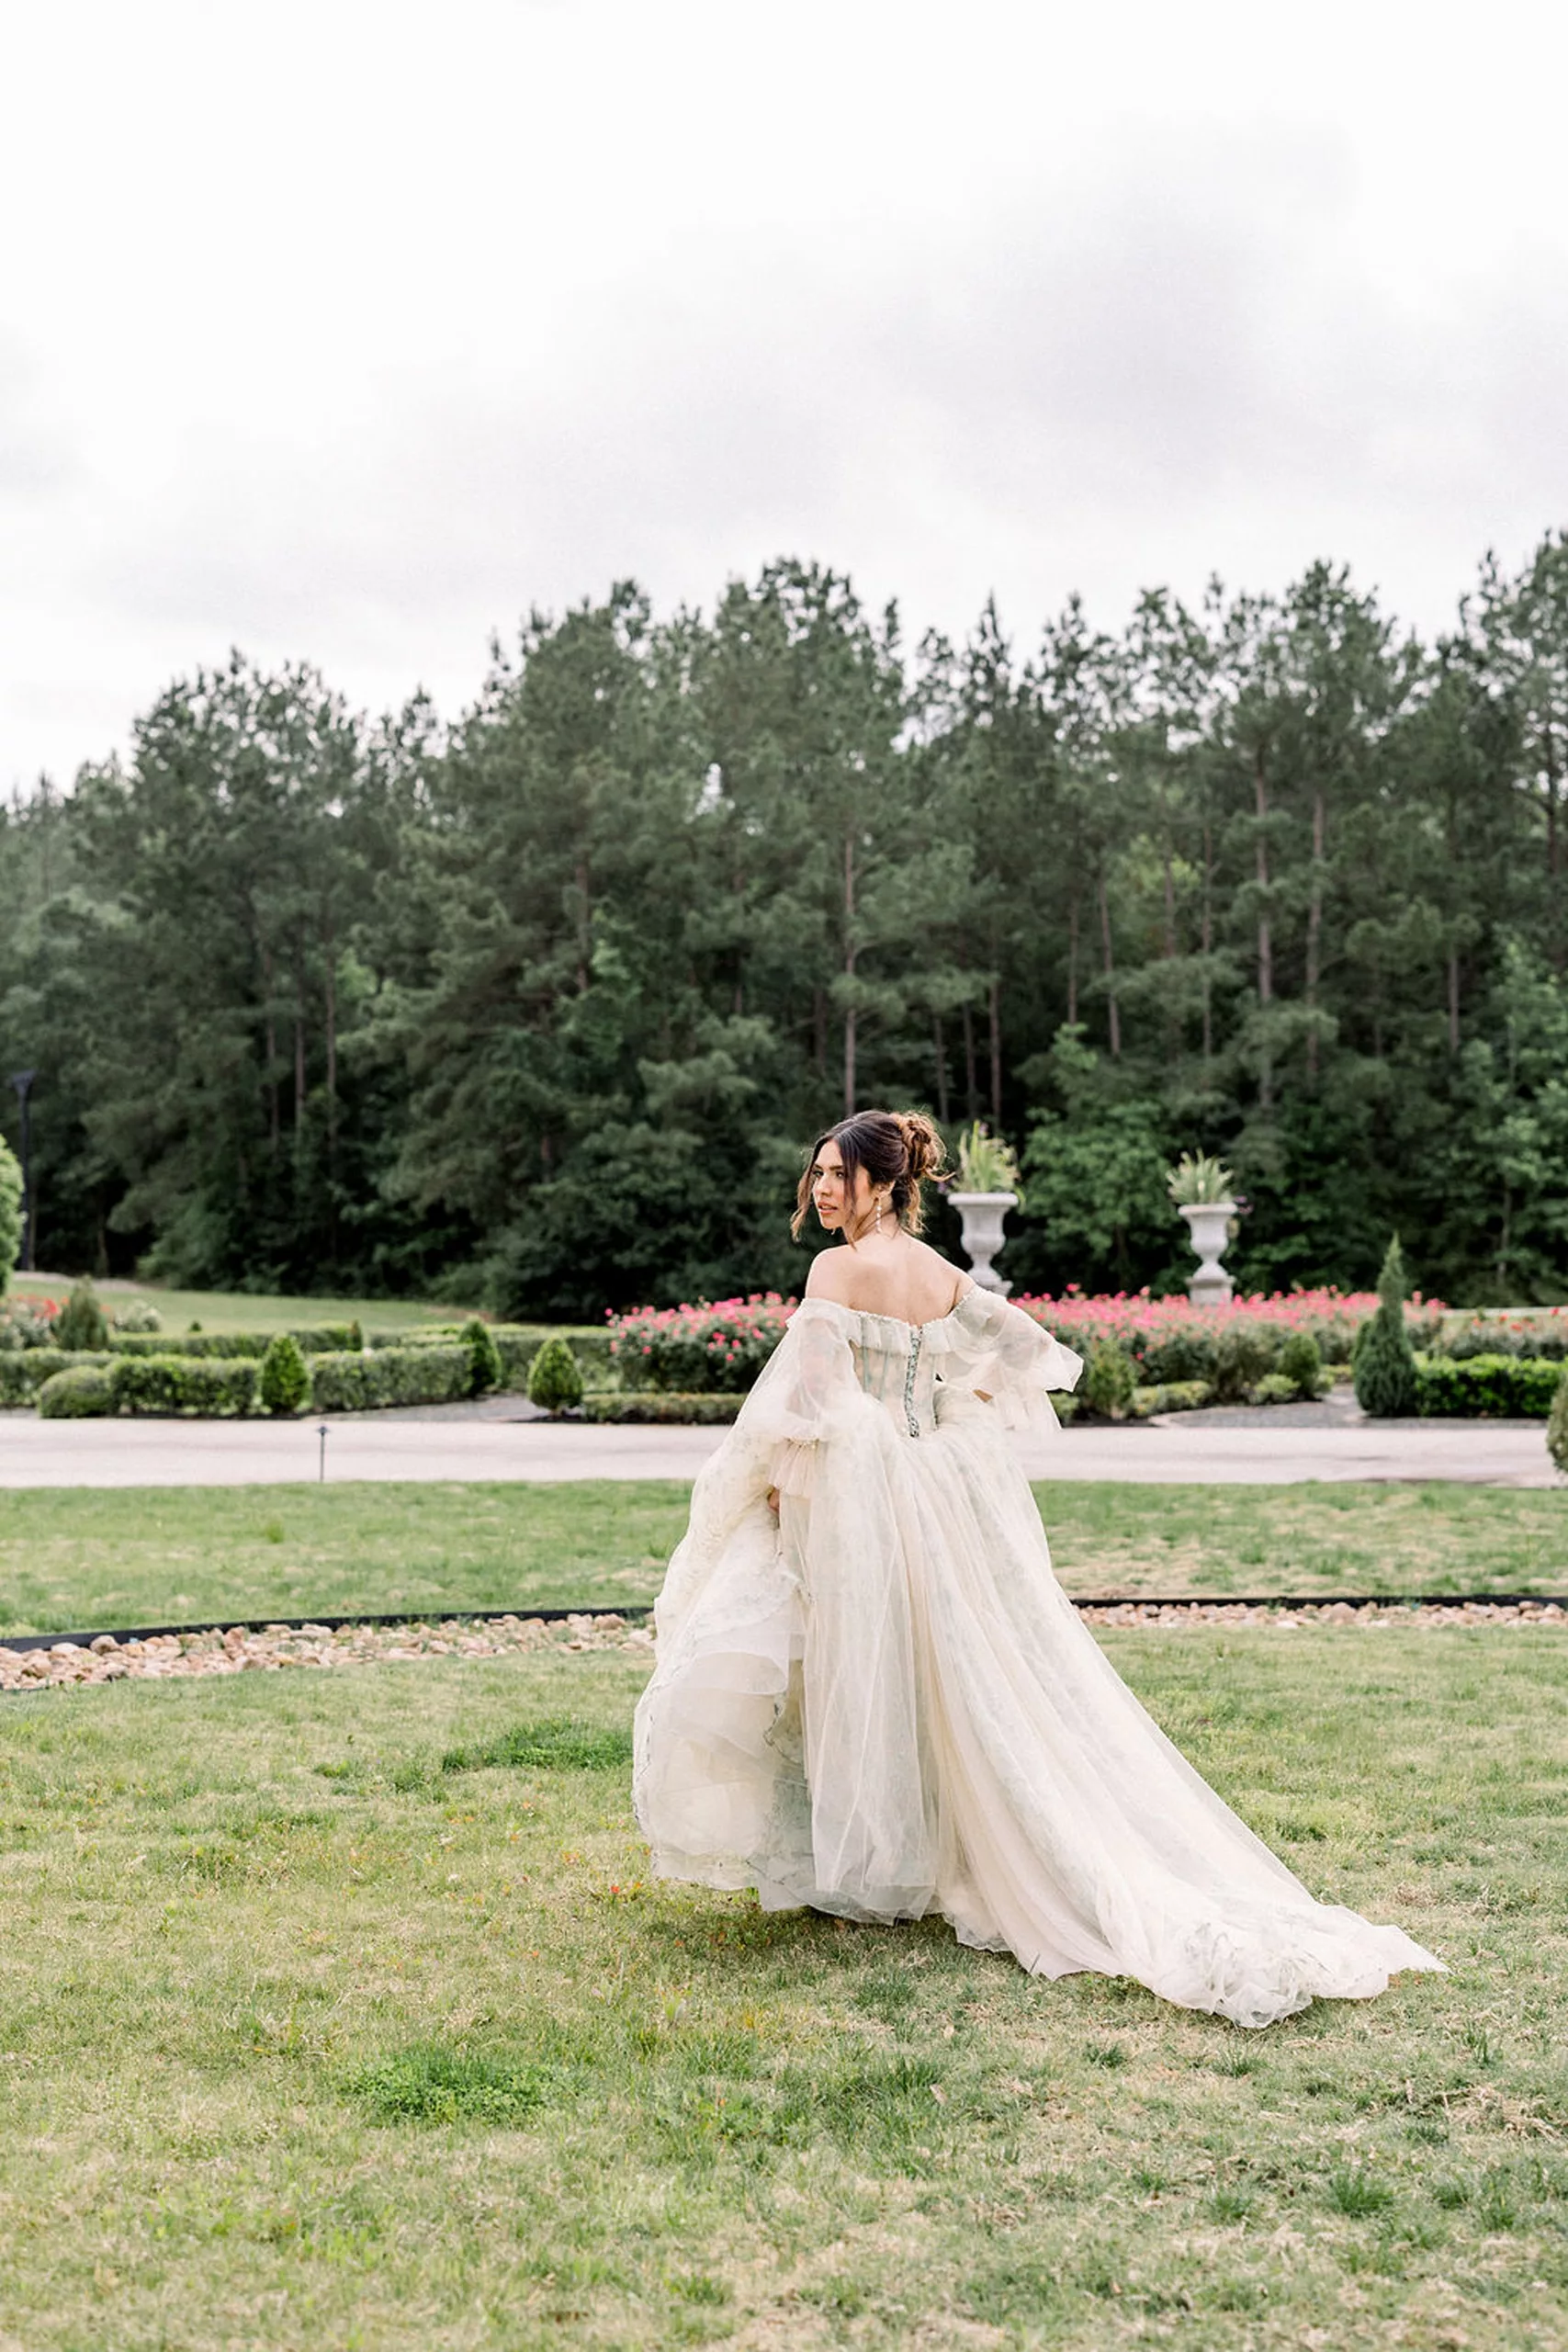 A bride carries her large train while walking through a grassy field in a garden